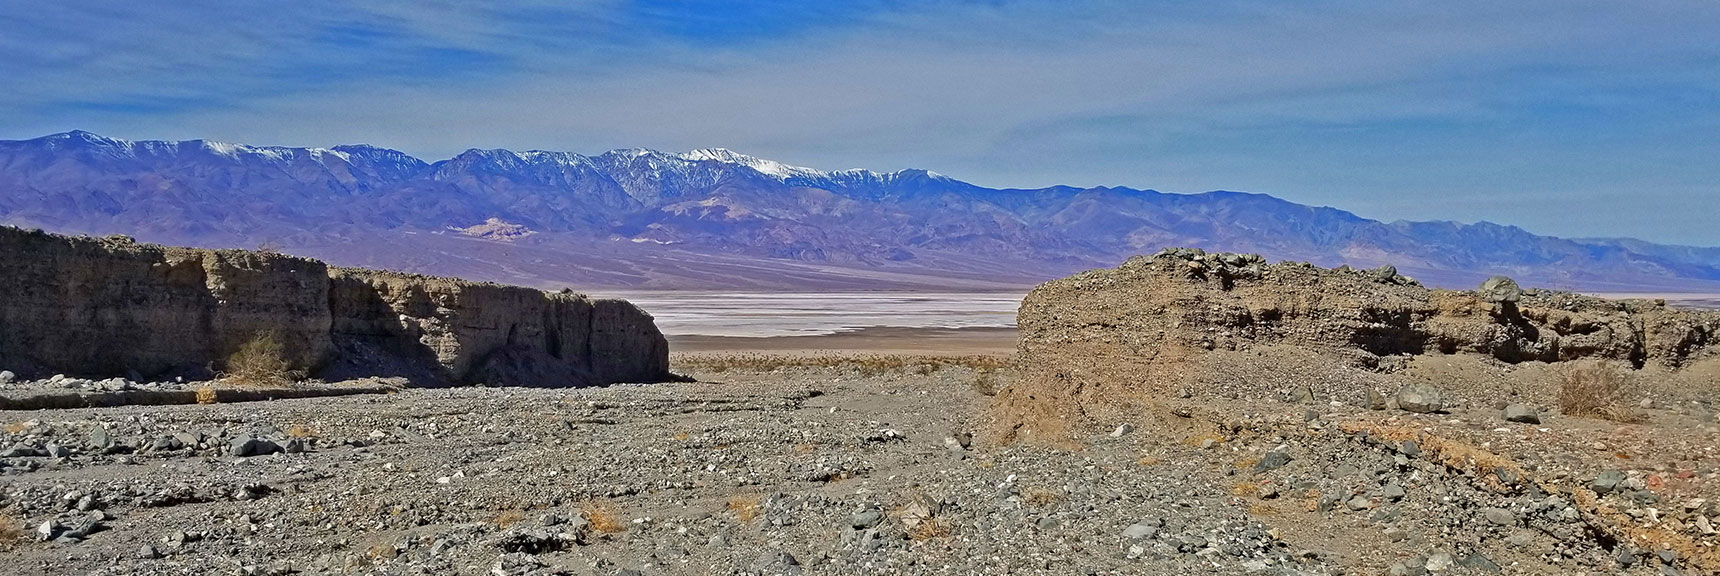 View Out the Entrance of Willow Canyon Toward Panamint Range and Telescope Peak. | Willow Canyon | Death Valley National Park, California